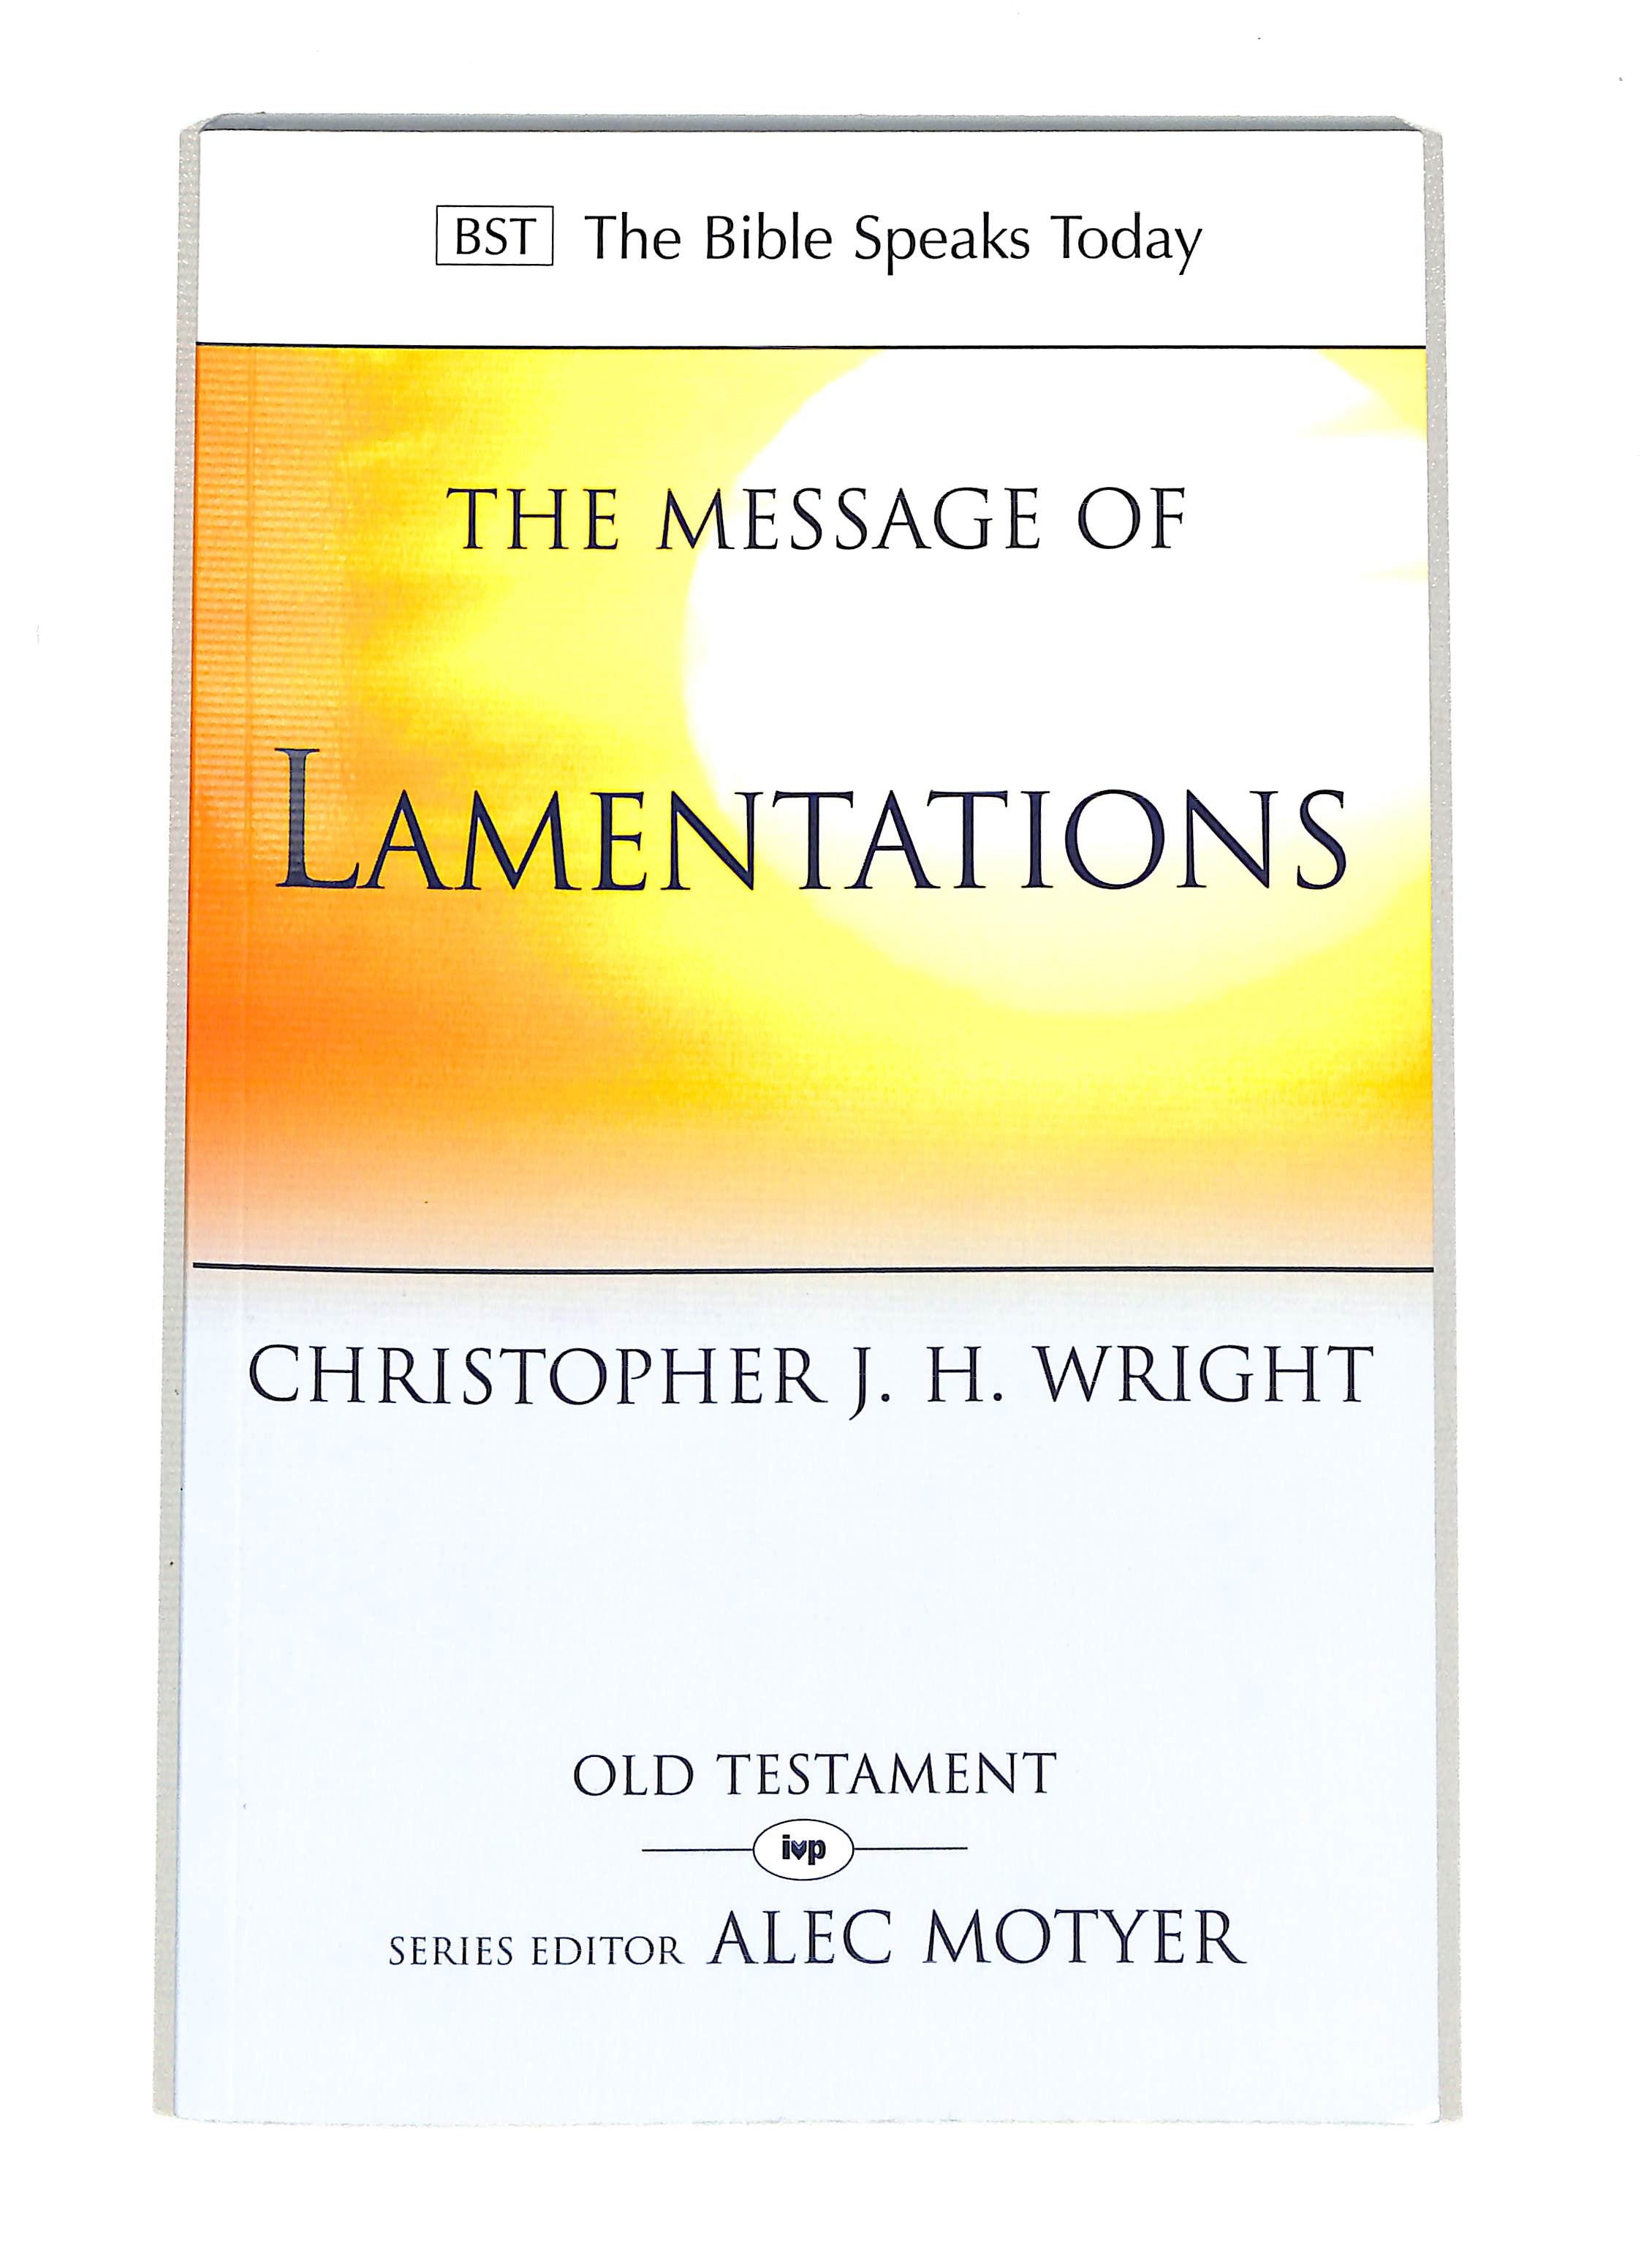 Image of The Message of Lamentations other